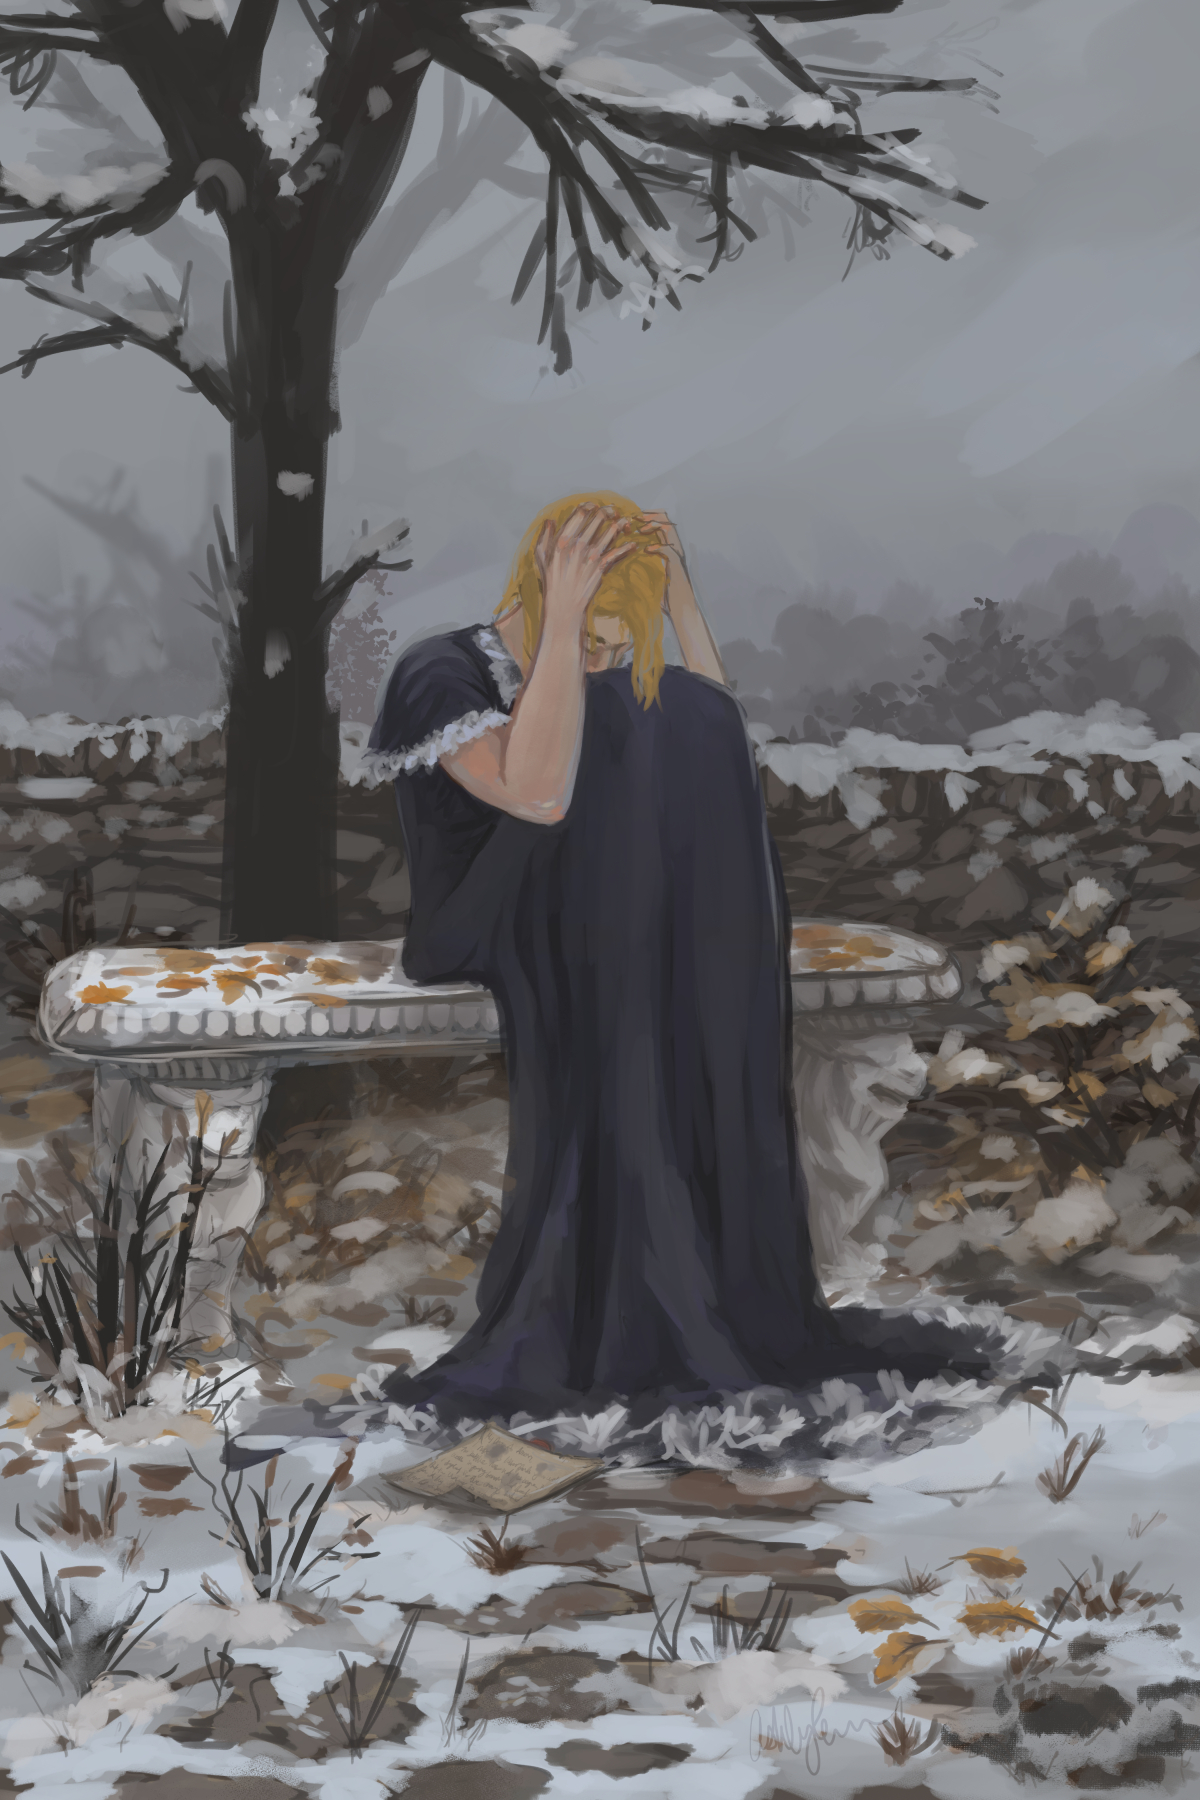 Digital painting of a woman outside, in the snow, on a bleak day. She's sitting on a bench, but her head is down and hands are in her hair. She's probably crying. There's a letter on the ground near her.